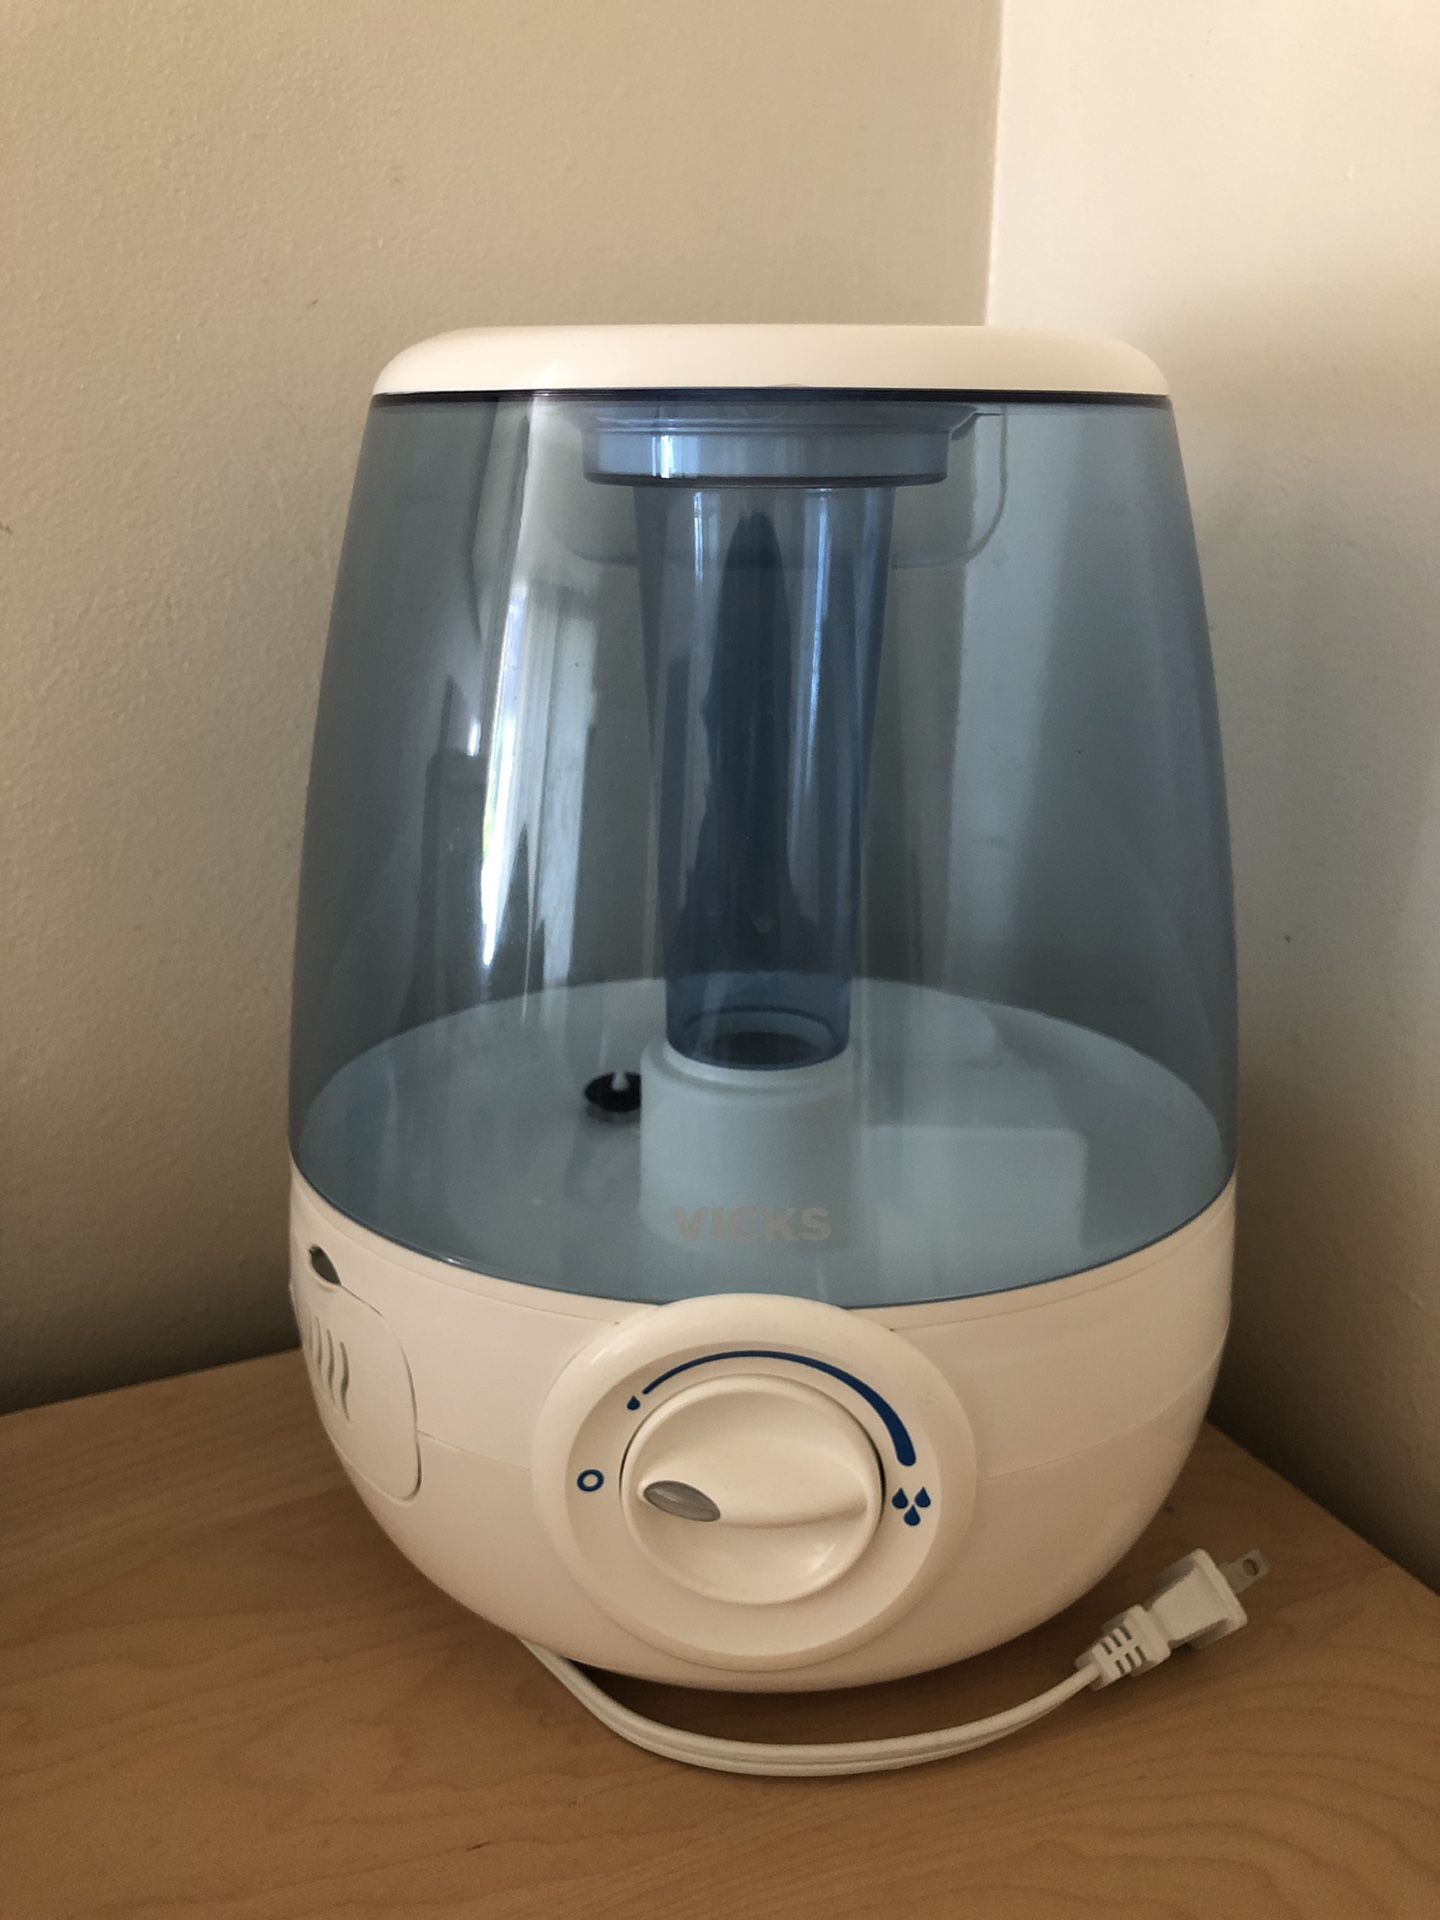 Vicks humidifier 1.2 Gallon with Cool Mist